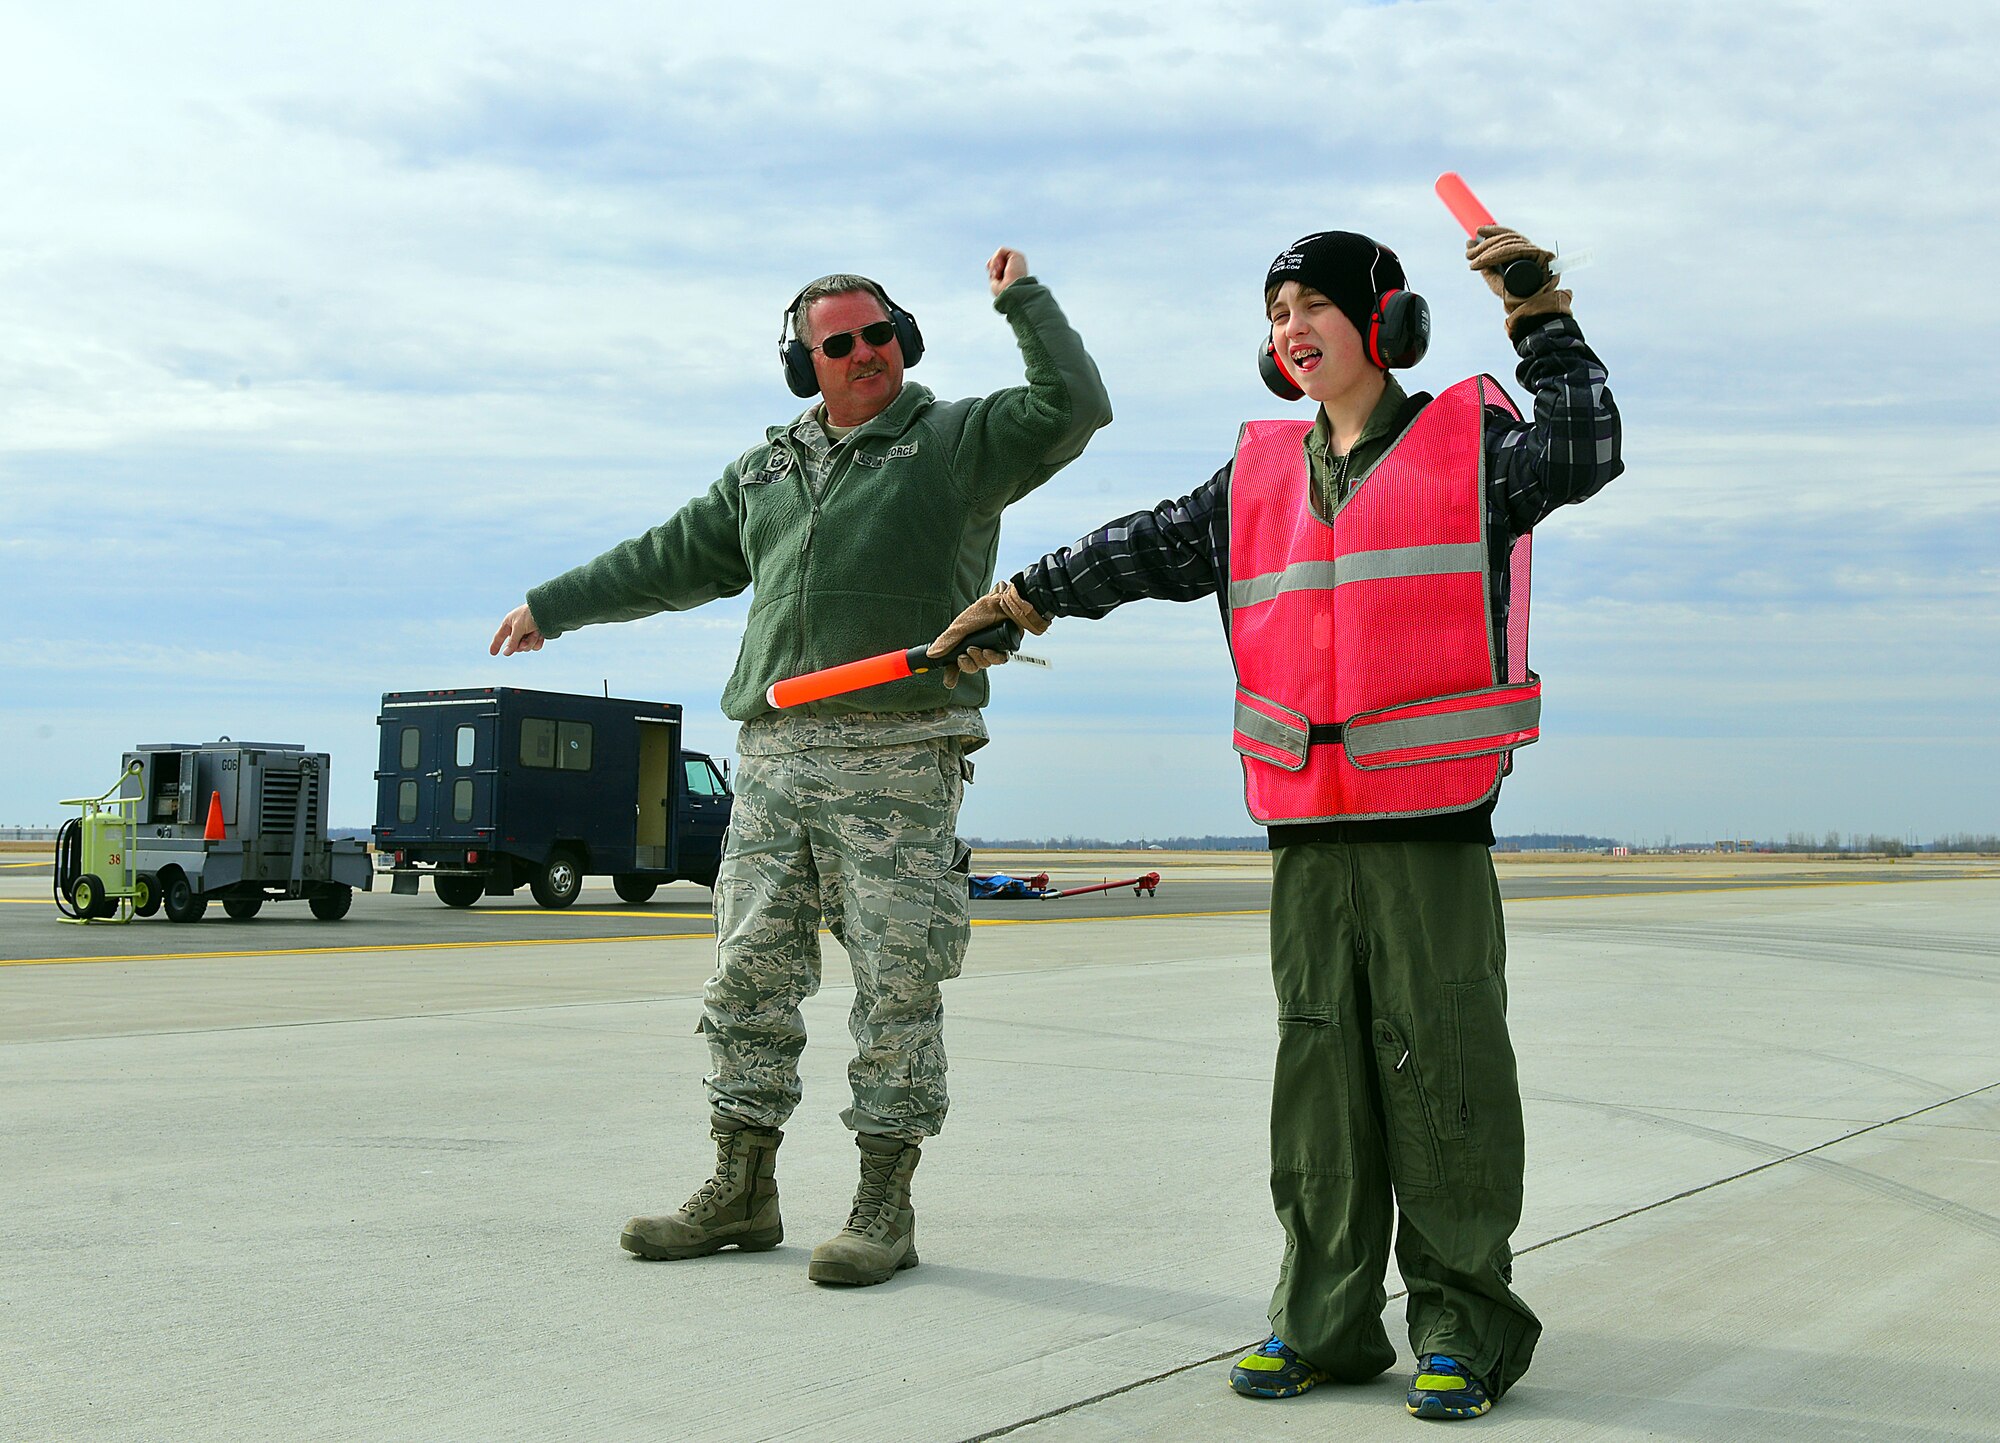 Senior Master Sgt. John Laibe, 121st Air Refueling Wing crew chief, instructs Ian Straight, a 12-year-old from Lancaster, Ohio, in the proper method of marshalling aircraft during a pilot for a day program March 19, 2015, at Rickenbacker Air National Guard Base, Ohio. The program treats a youth with chronic or life threatening illnesses to a day of military experiences. The 121st ARW has partnered with Nationwide Children’s Hospital to provide this opportunity. (U.S. Air National Guard photo by Master Sgt. Ralph Branson/Released)